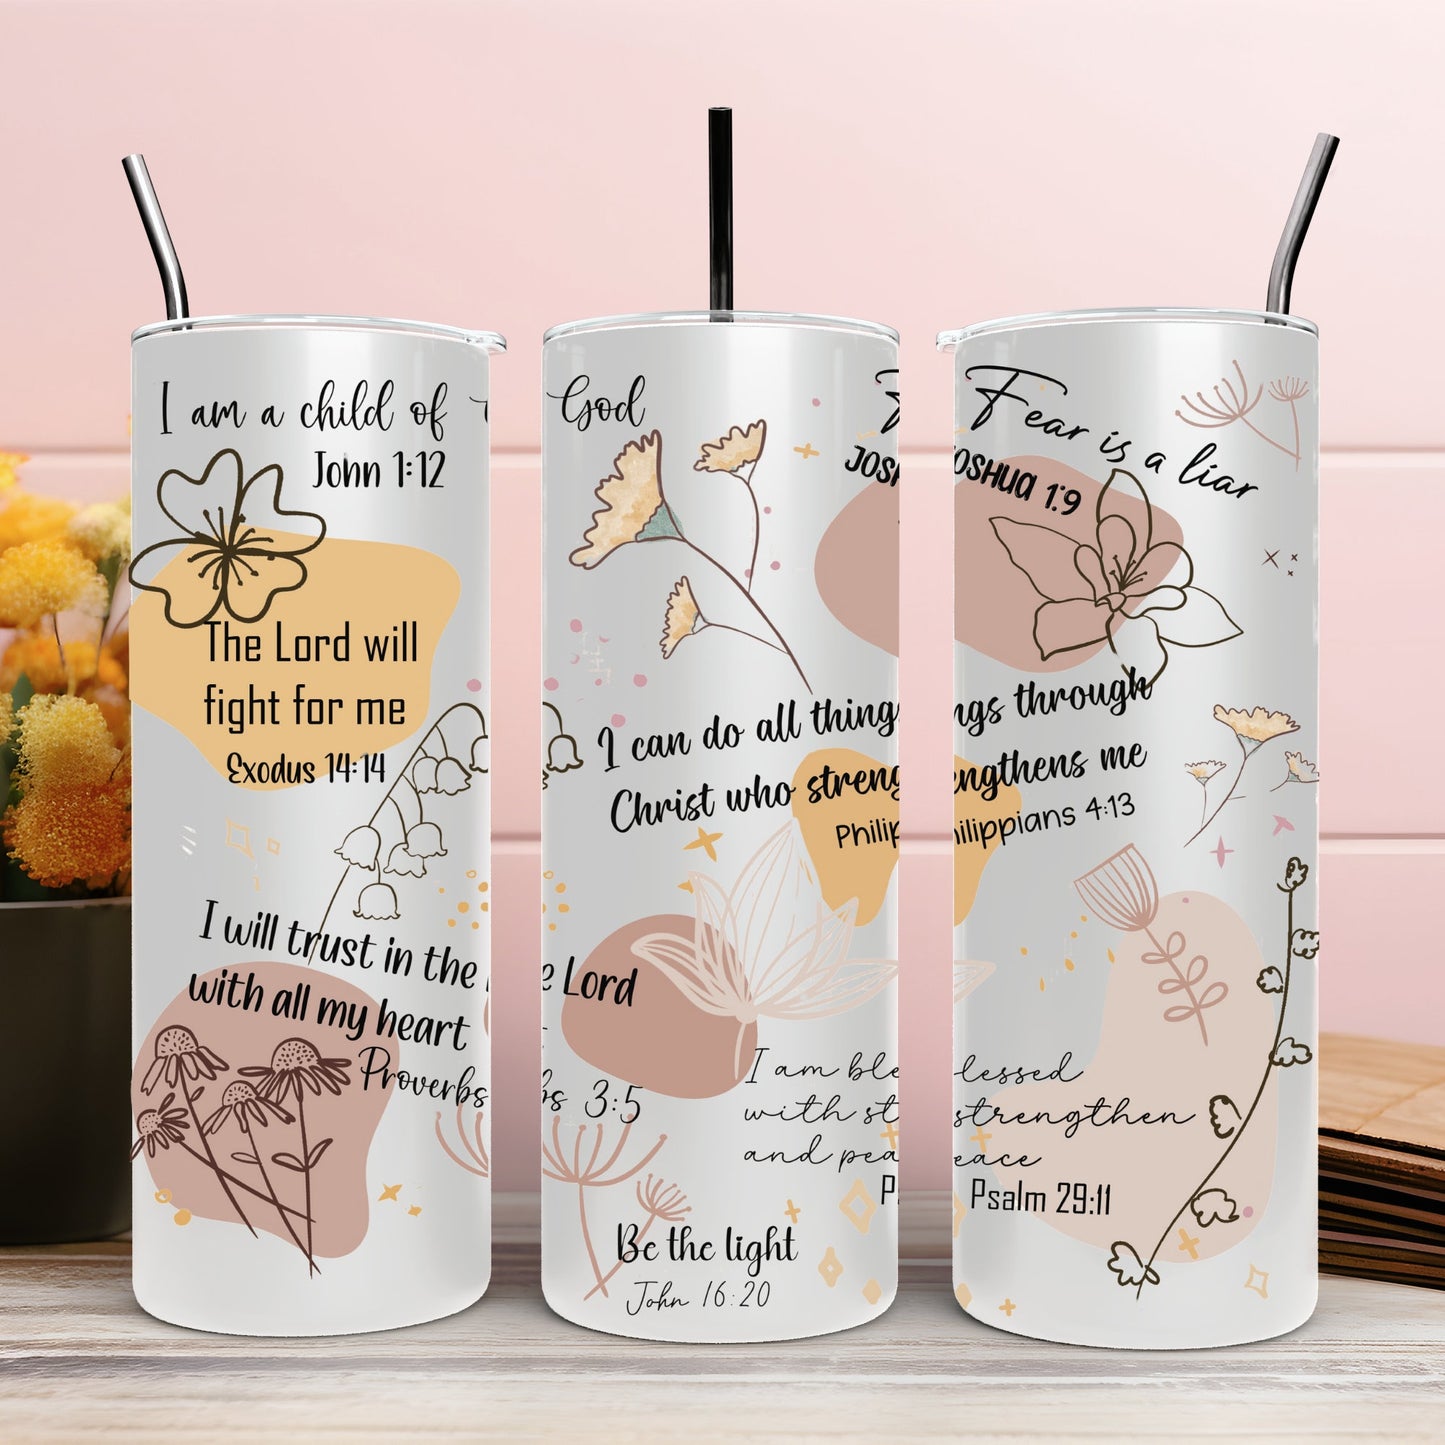 religious cup, Christian gift ideas, affirmation tumbler, faith tumbler, faith gifts for women, bible verse tumbler, bible affirmations, Christian gift for women, Christian faith gift for her, Christmas gift, Easter gift, best friend gift, valentines